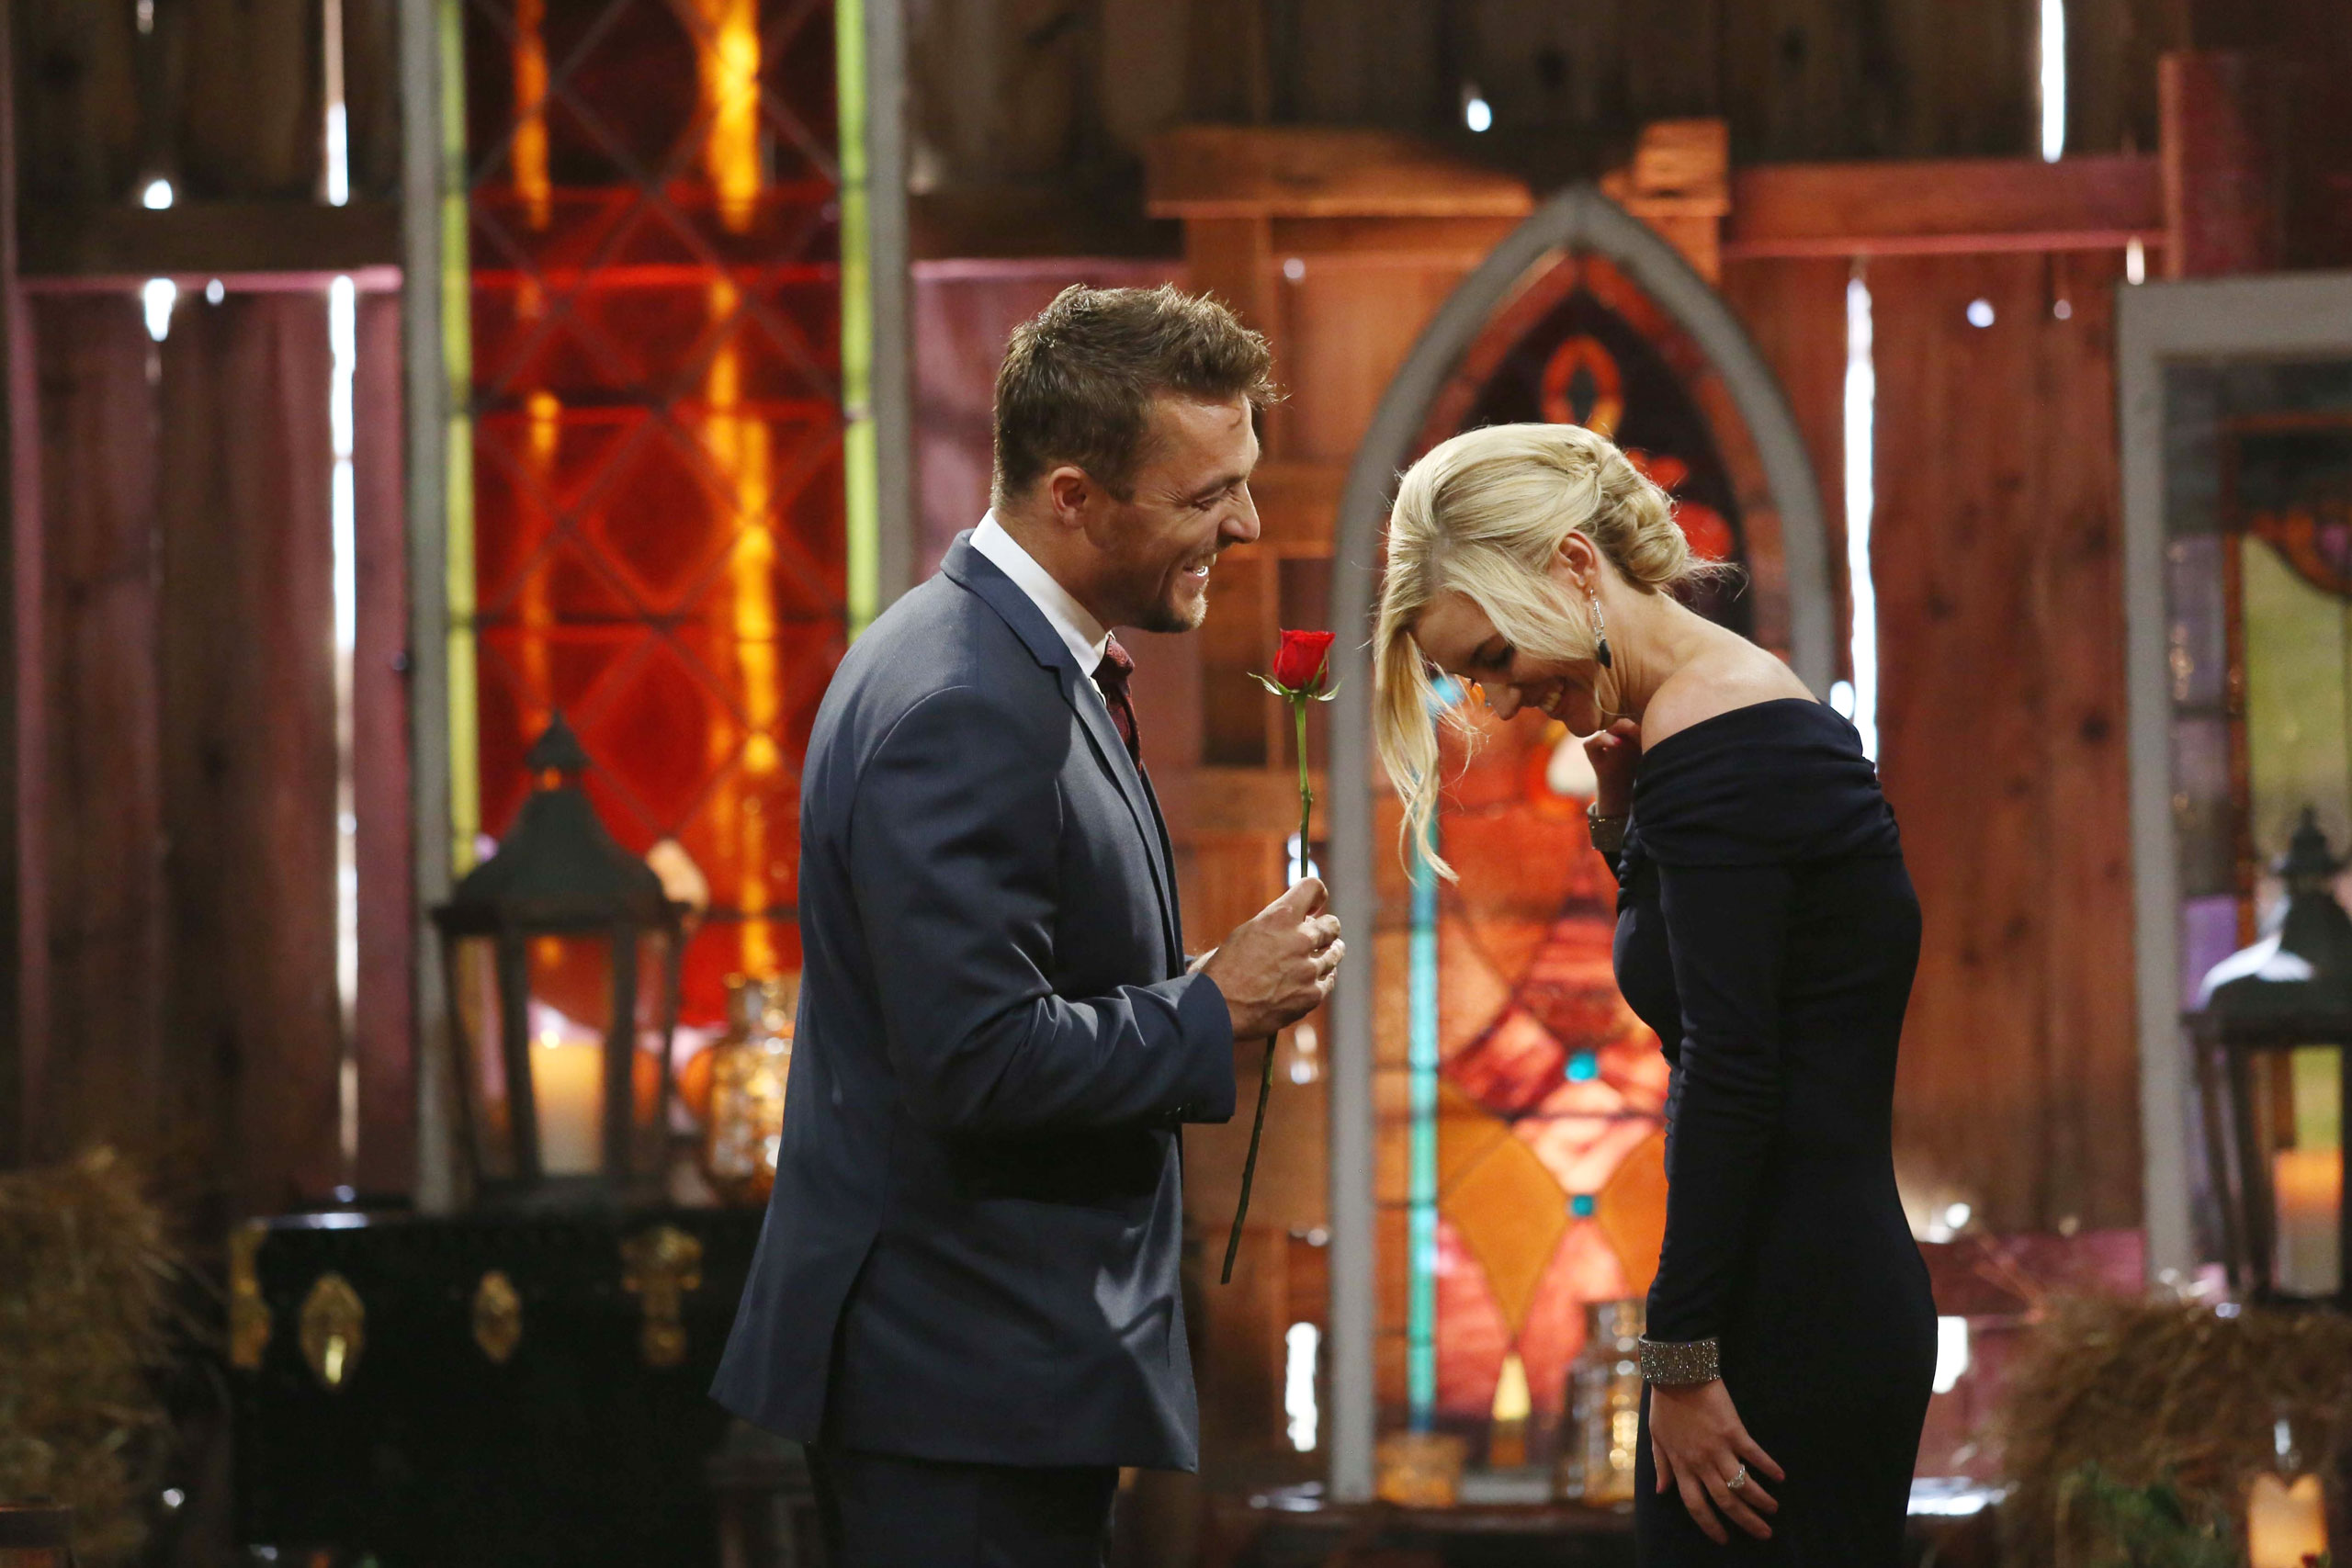 Chris Soules proposes to Whitney Bischoff on the Season Finale of "The Bachelor," on March 9, 2015. (Nicole Kohl—ABC/Getty Images)